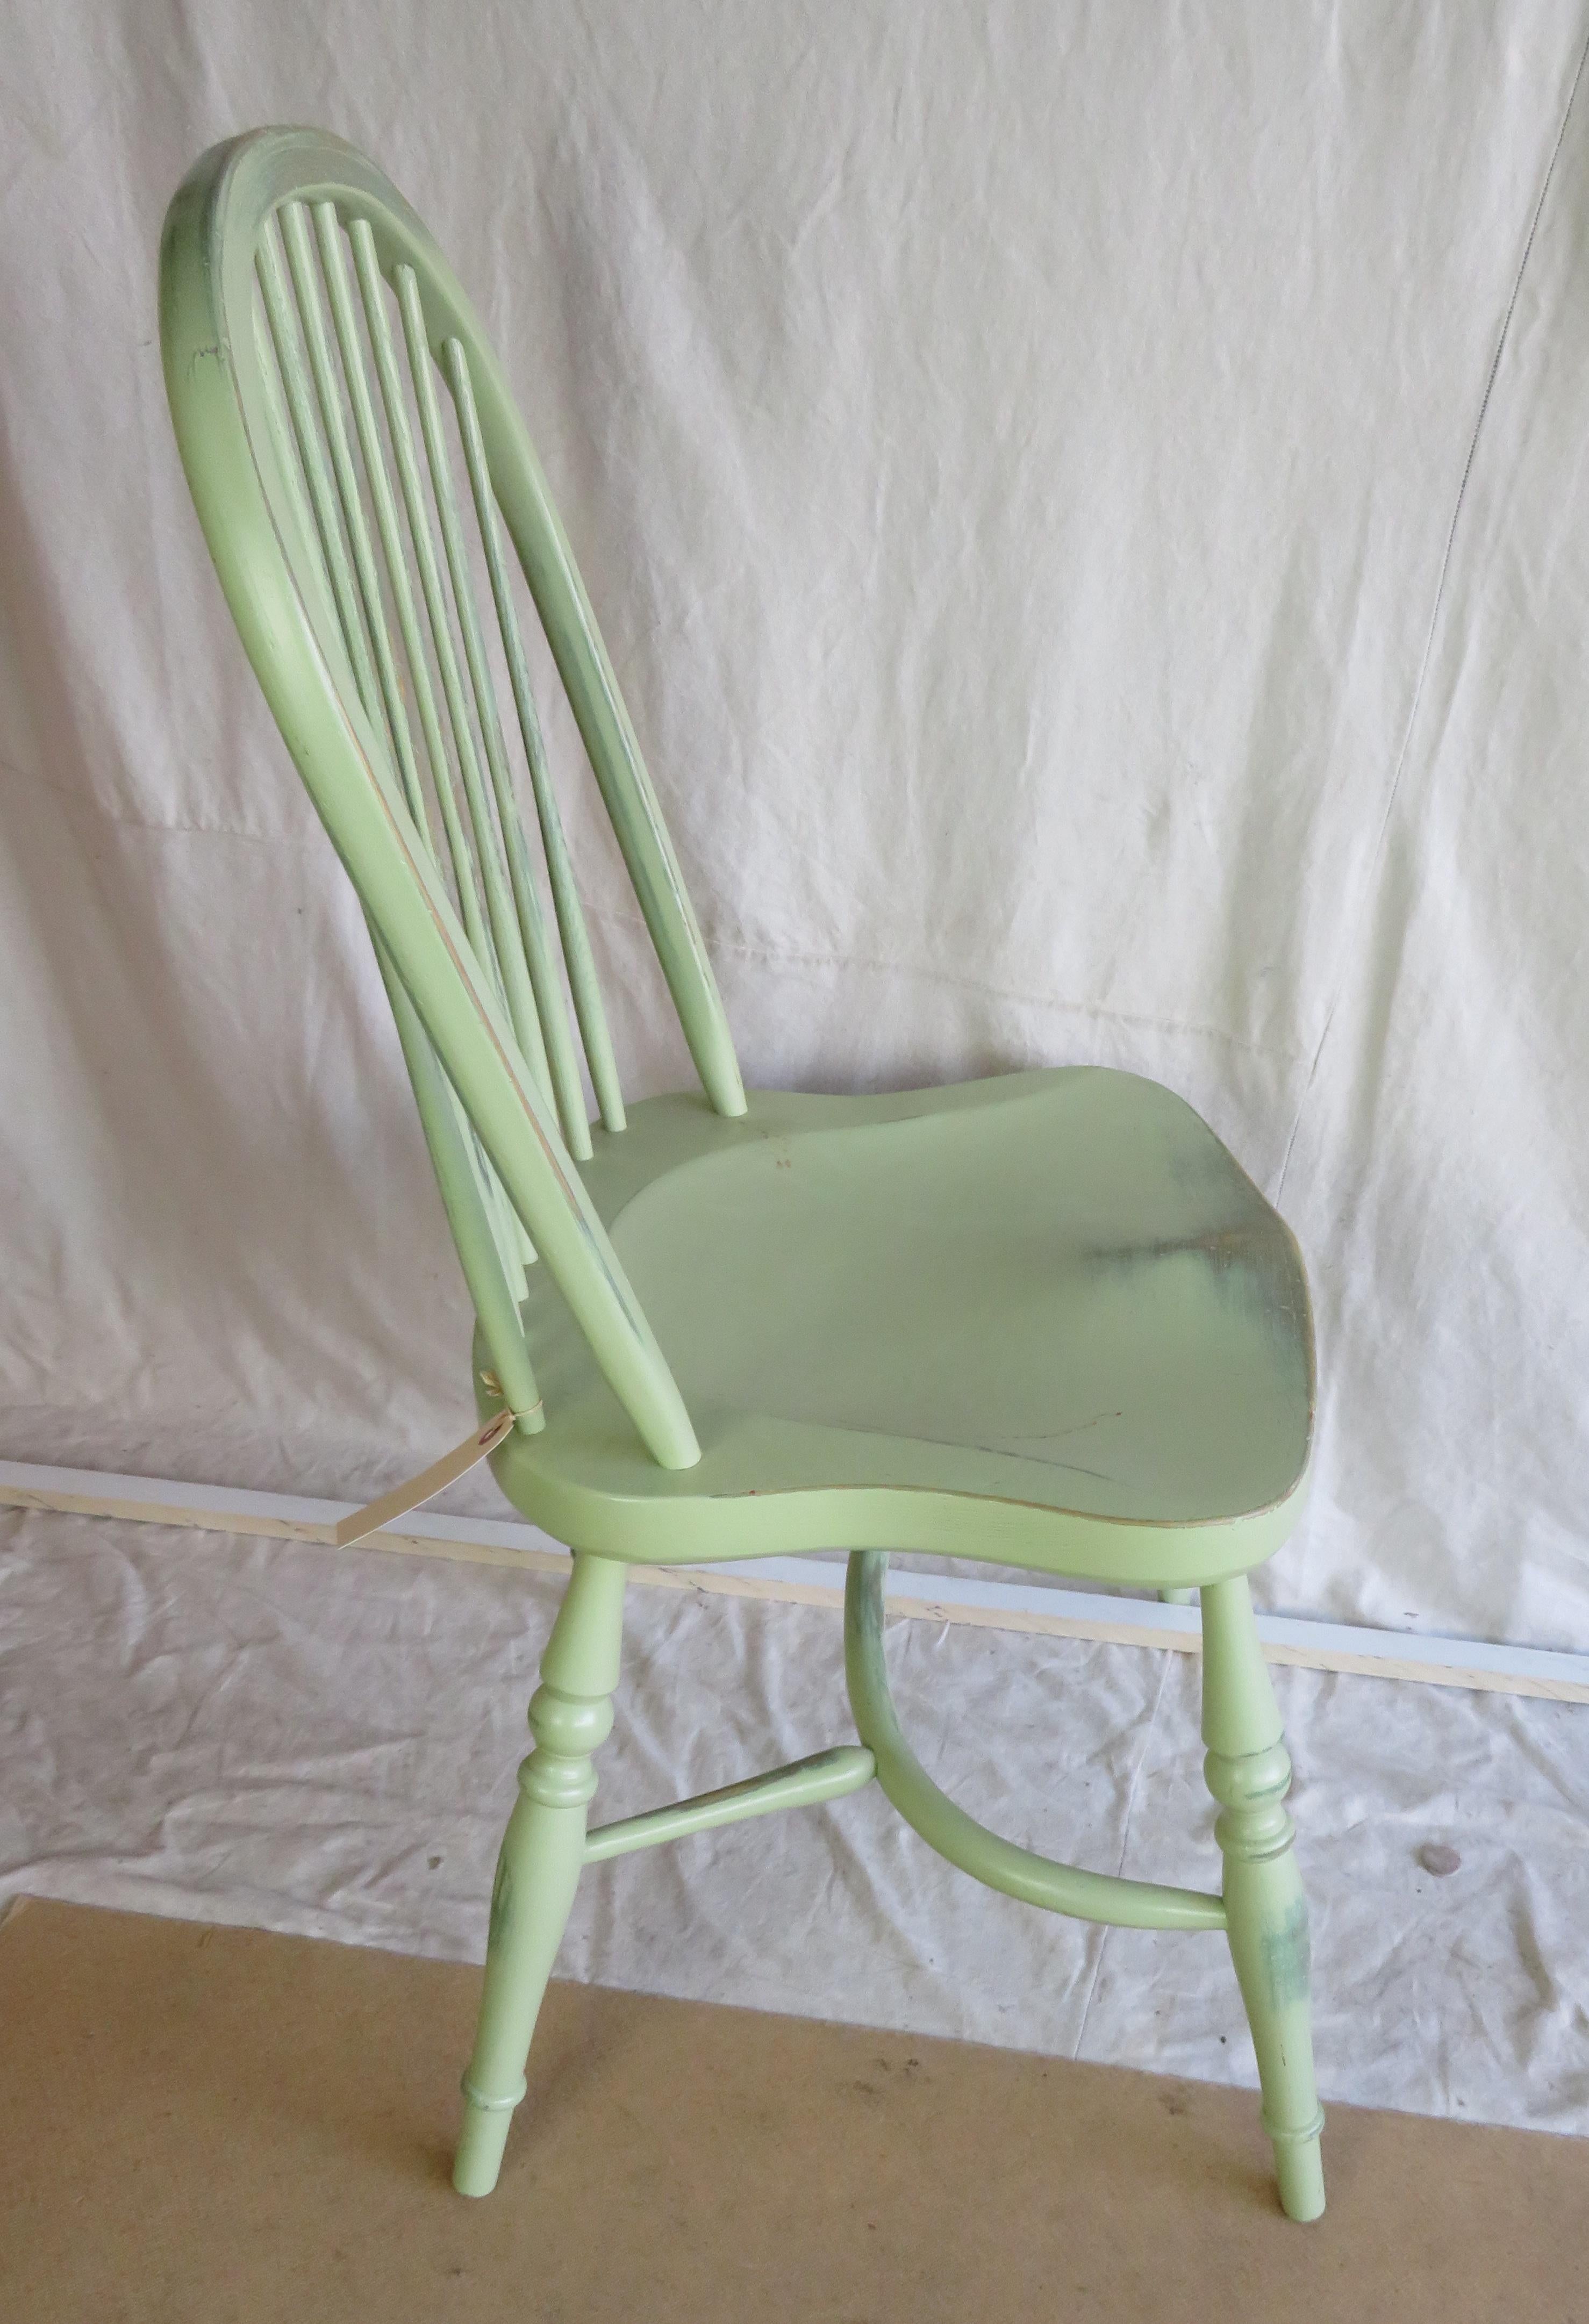 Reproduction stick back windsor side chair in light green distressed finish.